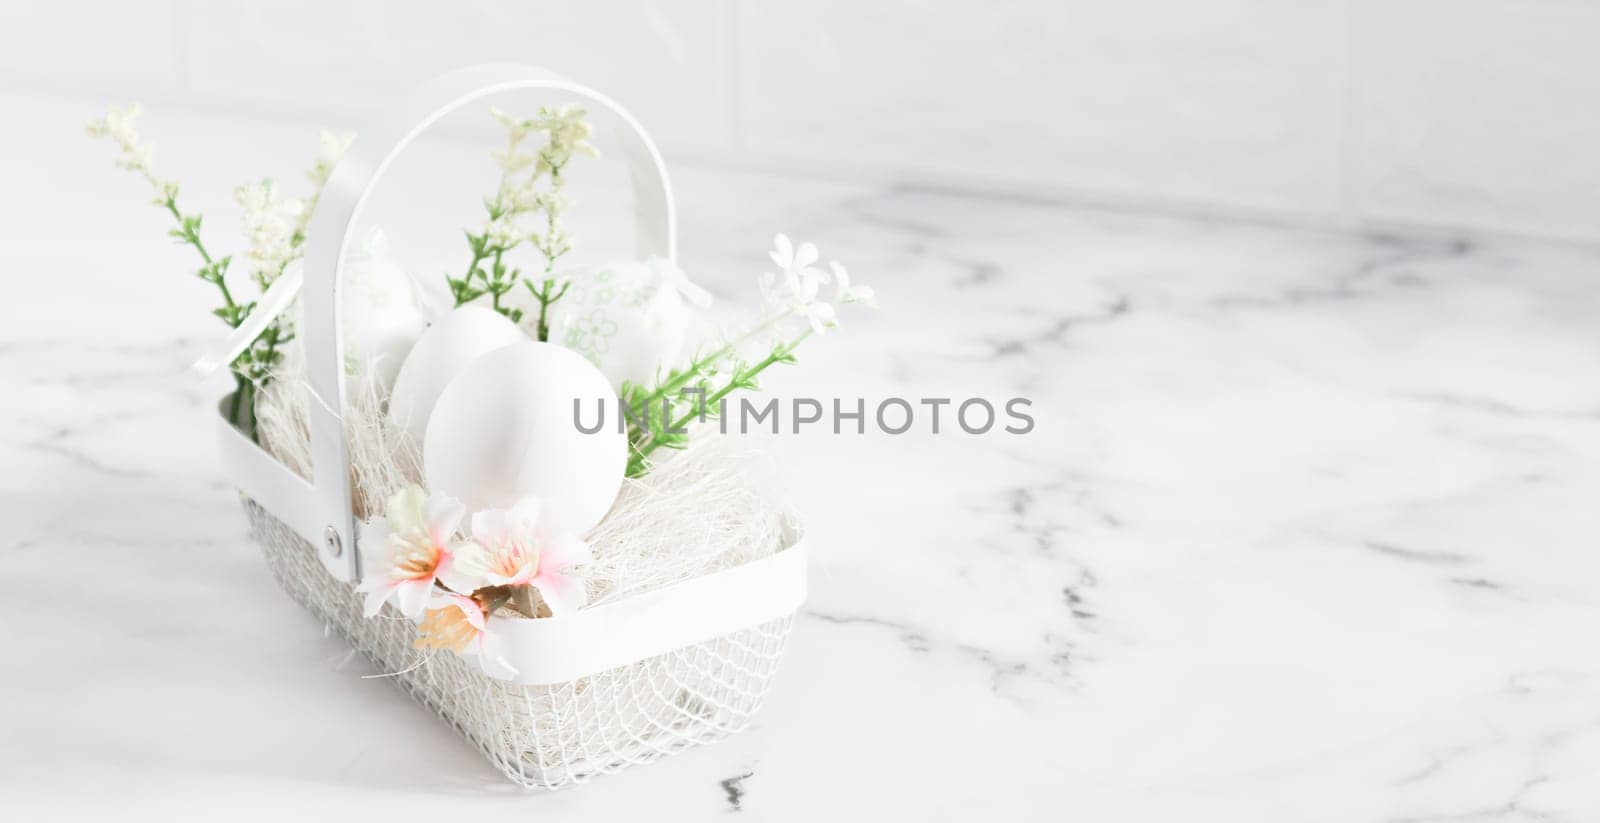 Decorative white eggs in a metal basket with eggs, spring flowers and straw stand on the left on a marble table with copy space on the right in the early morning, close-up side view. Happy easter concept, holiday banner.